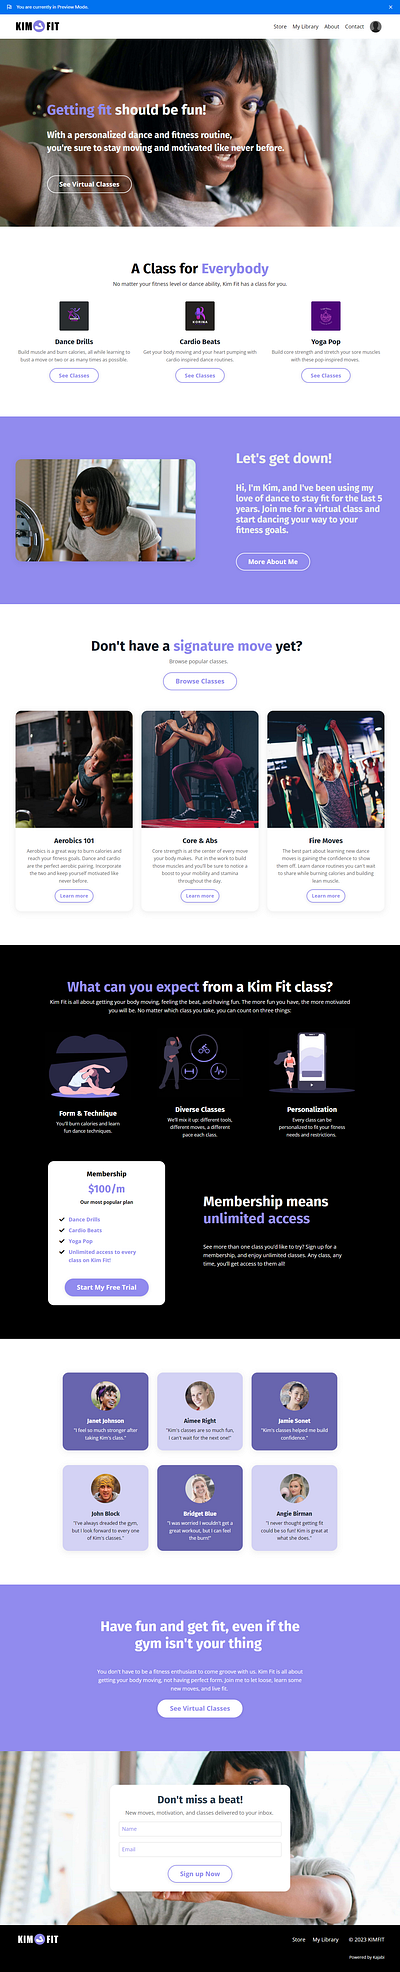 FITNESS WEBSITE HOME PAGE anytime fitness website fitness 6 week challenge fitness divas website fitness website design fitness website templates la fitness website